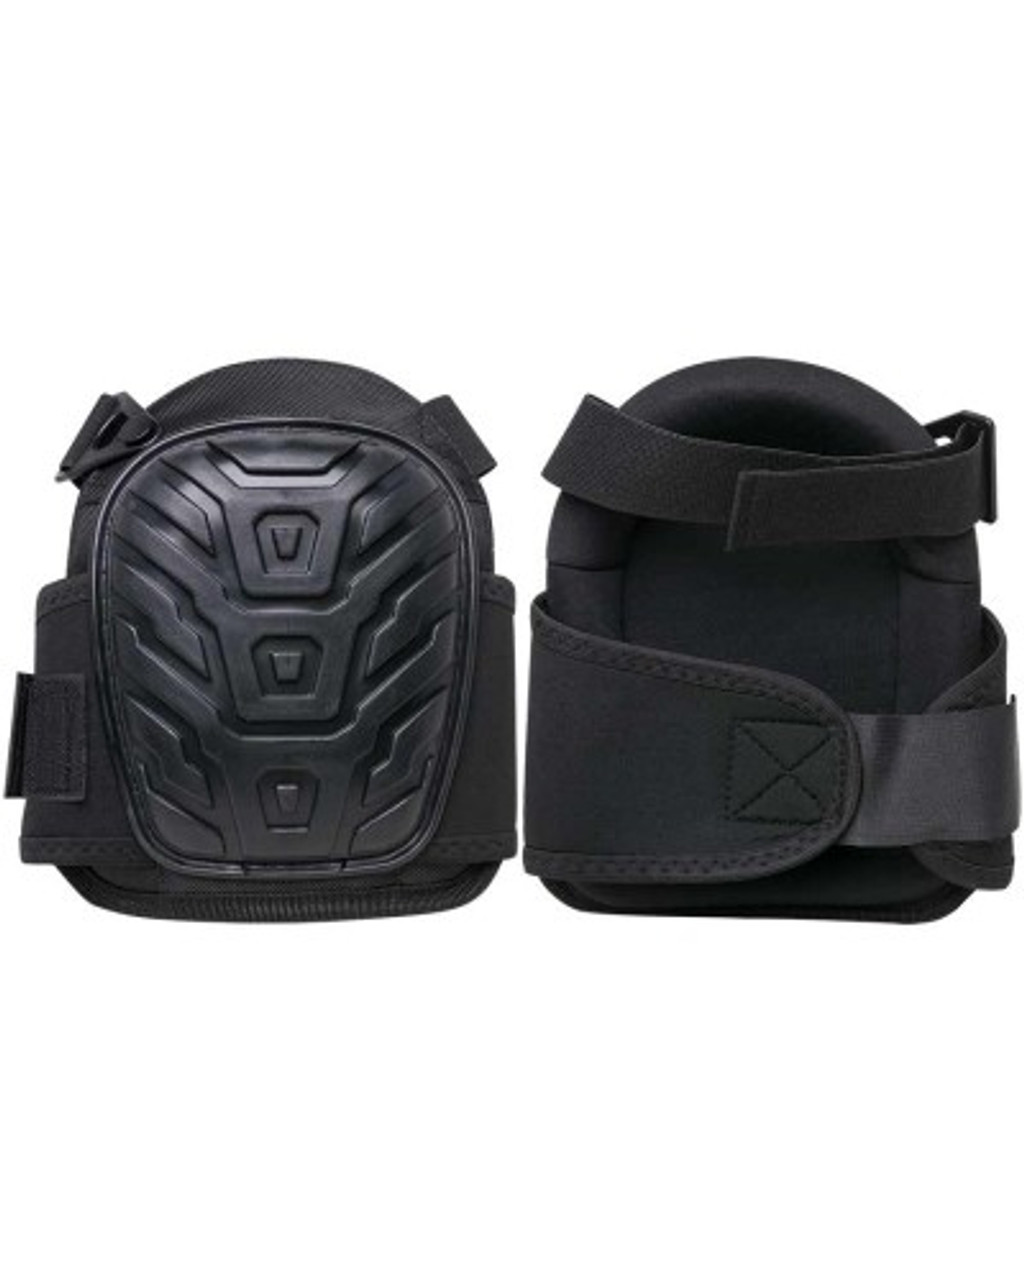 1923 Premium Over sized Knee Pads with Turtle back Shell